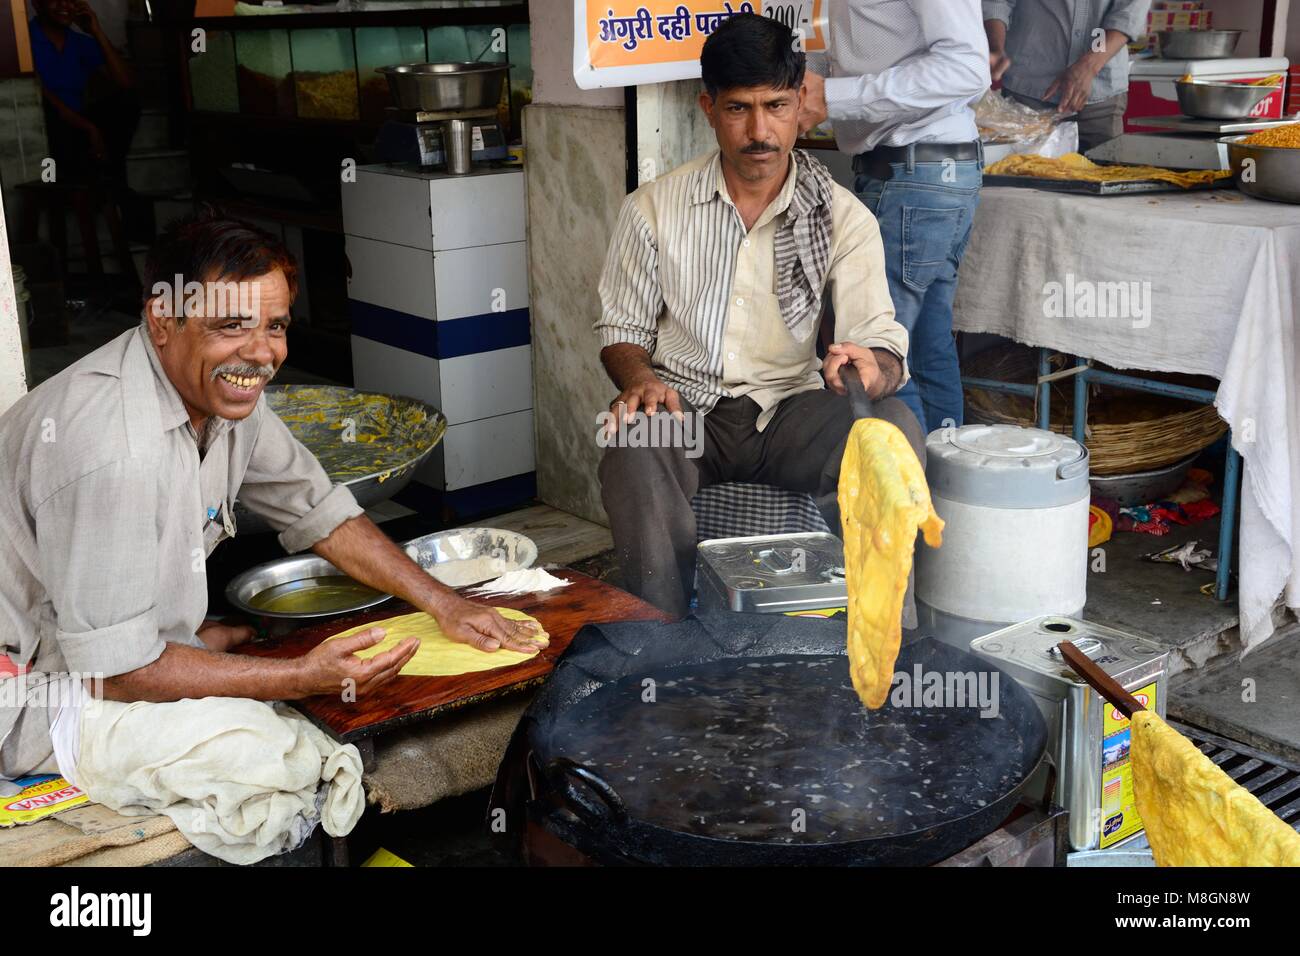 Indian street food of deep fried roti Indian bread Udaiour Rajasthan India Stock Photo